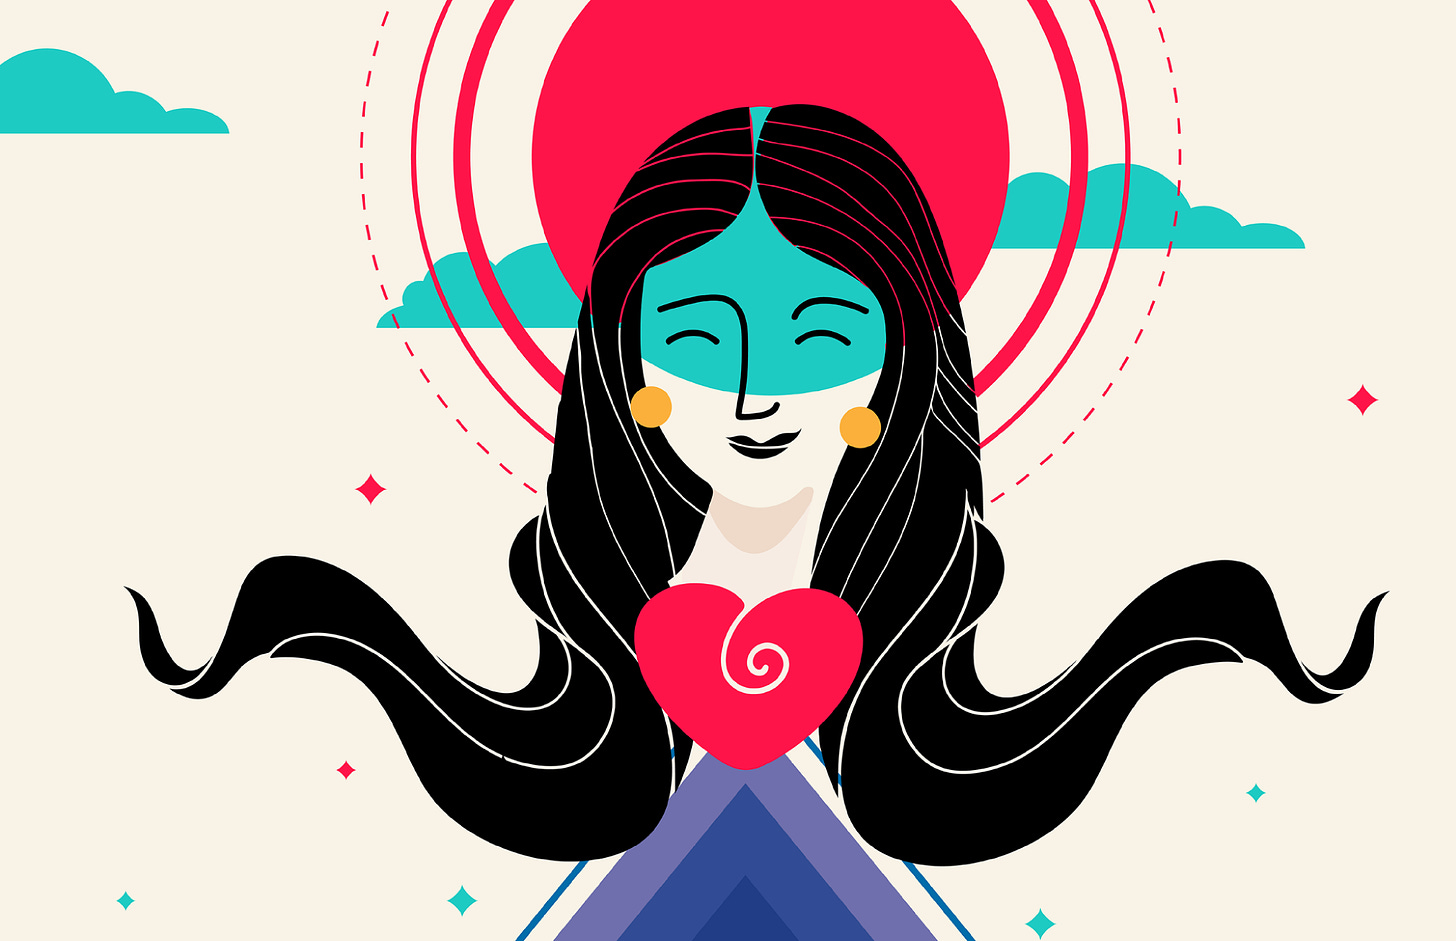 Digital drawing of a smiling person with flowing black hair, a corona of sun behind her head, and a red heart in front of her